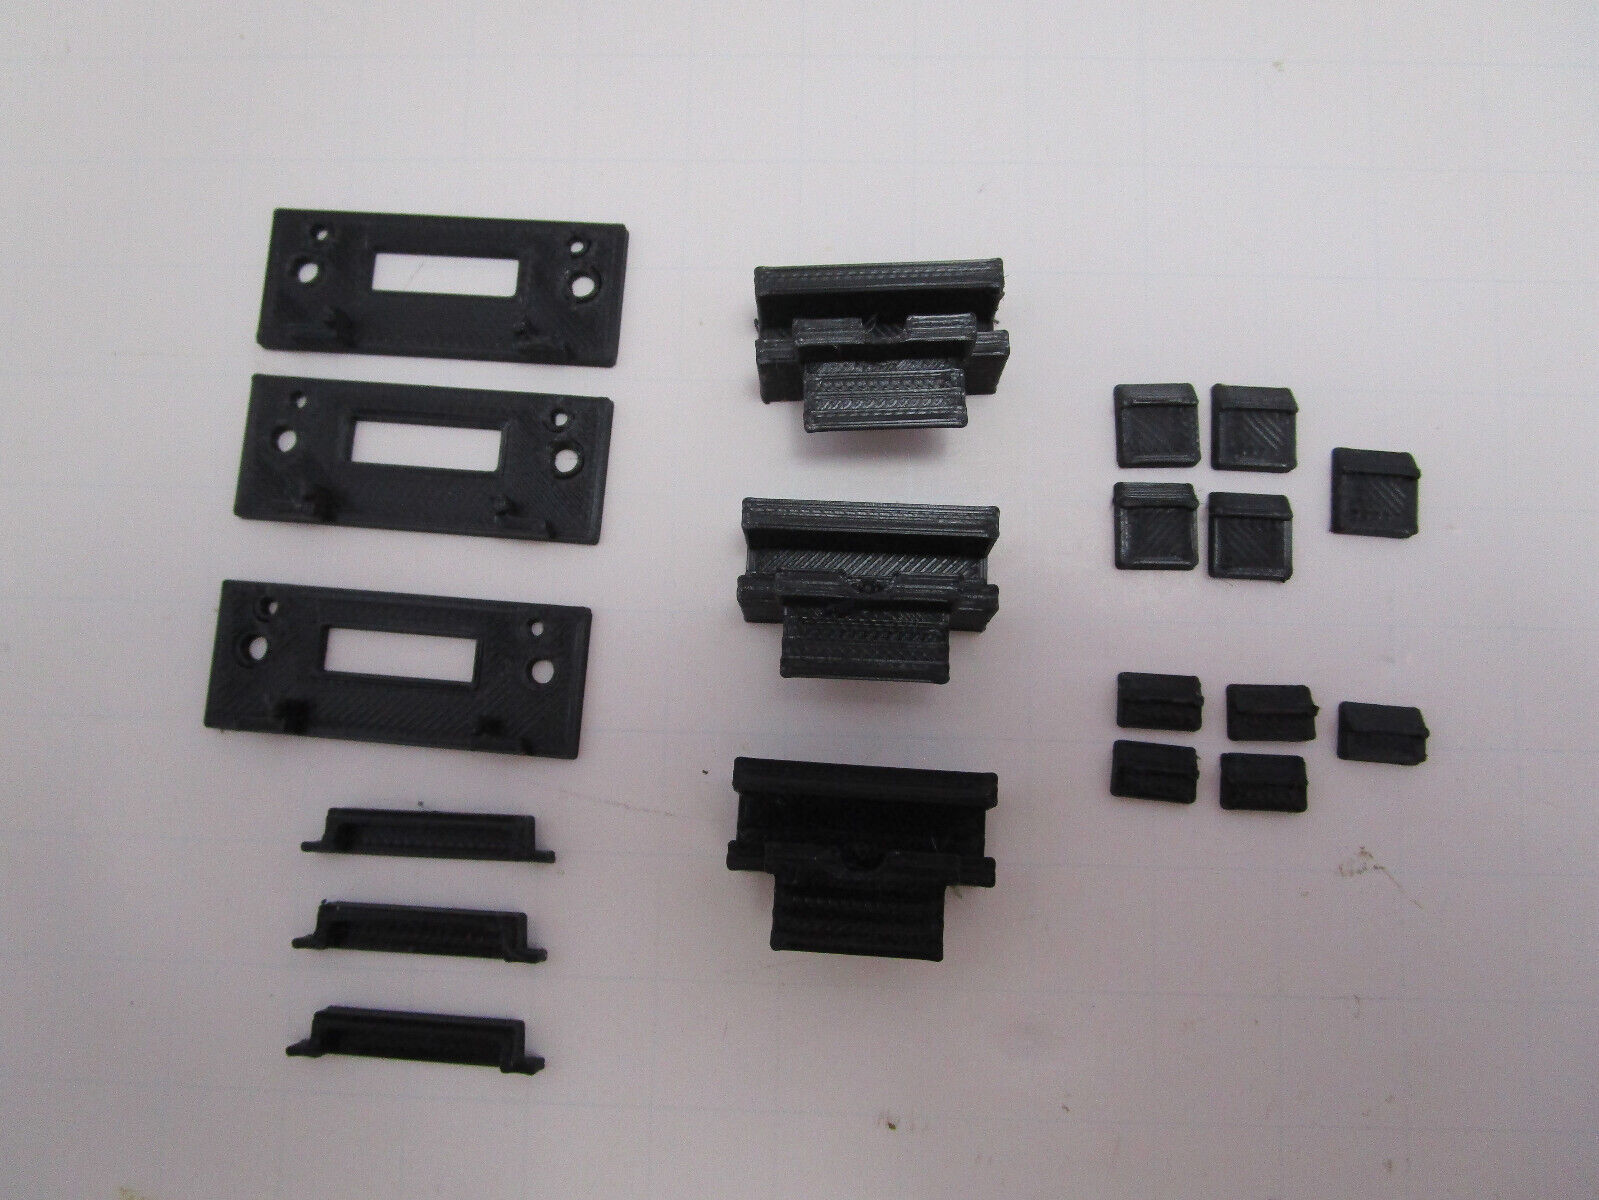 3D PRINTED KEYBOARD CASE CLIP REPAIR KIT FOR COMMODORE SX-64 PORTABLE COMPUTER